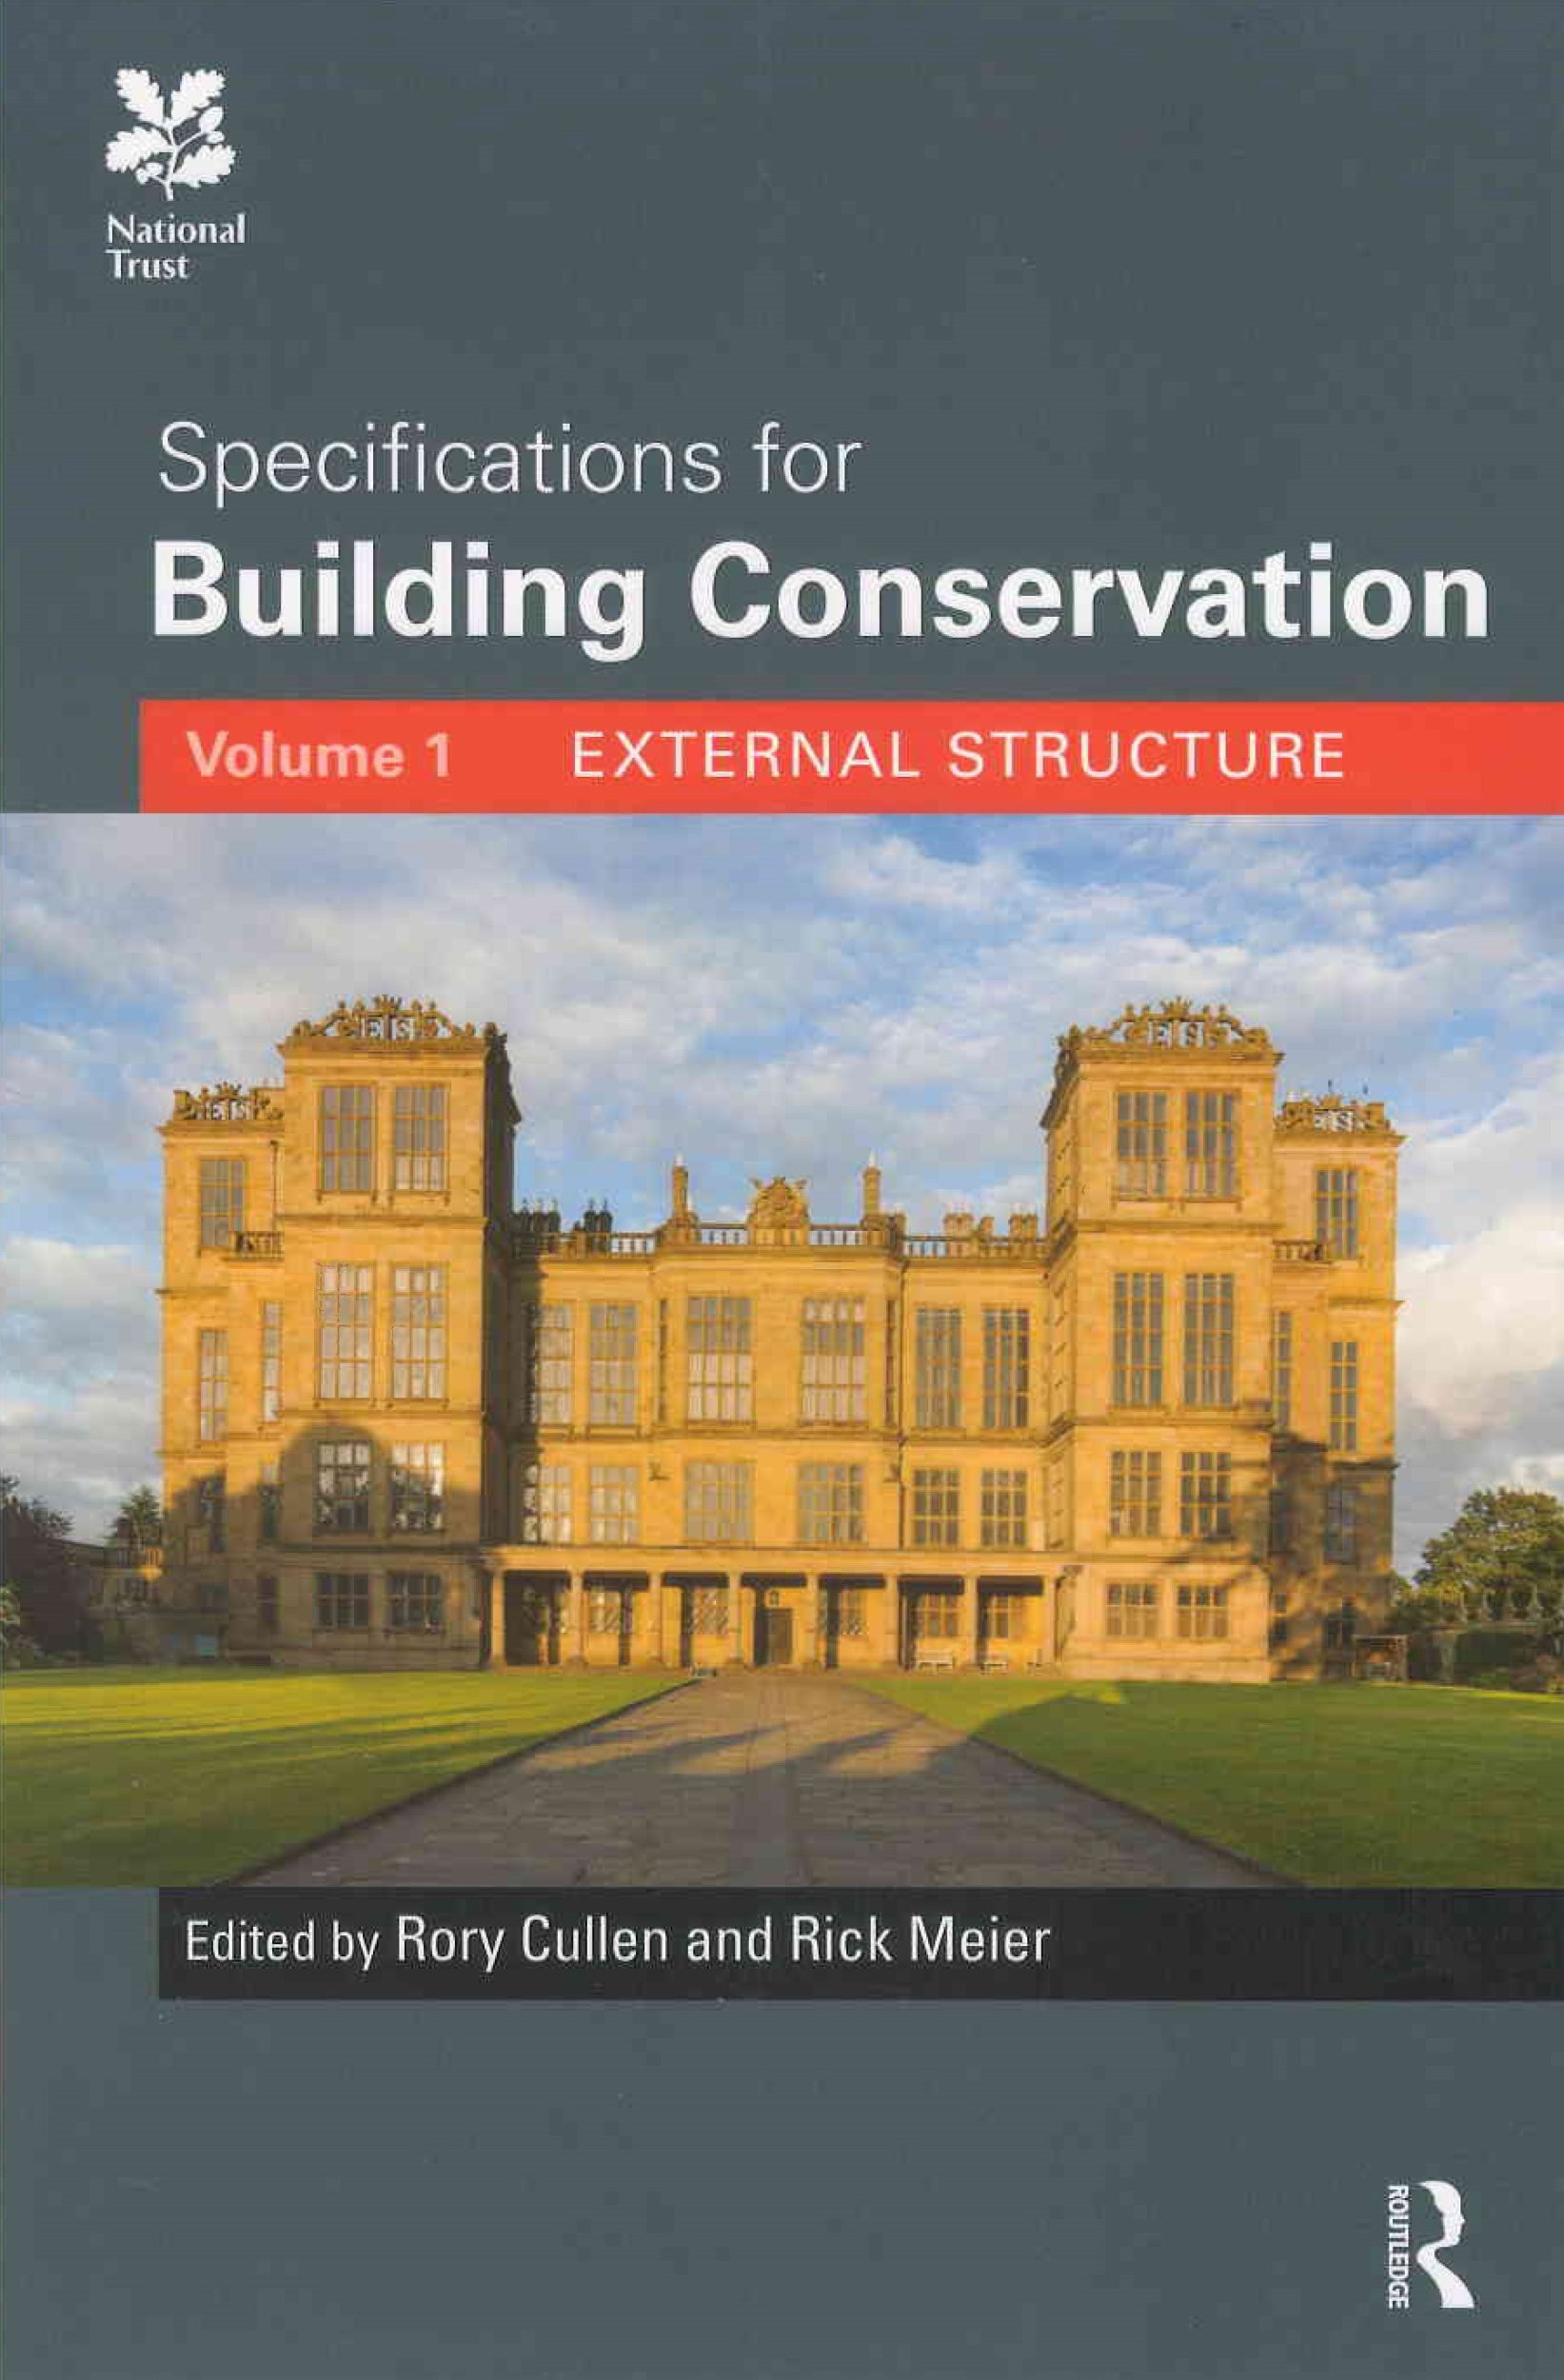 Specifications for building conservation. Vol. 1, External structure